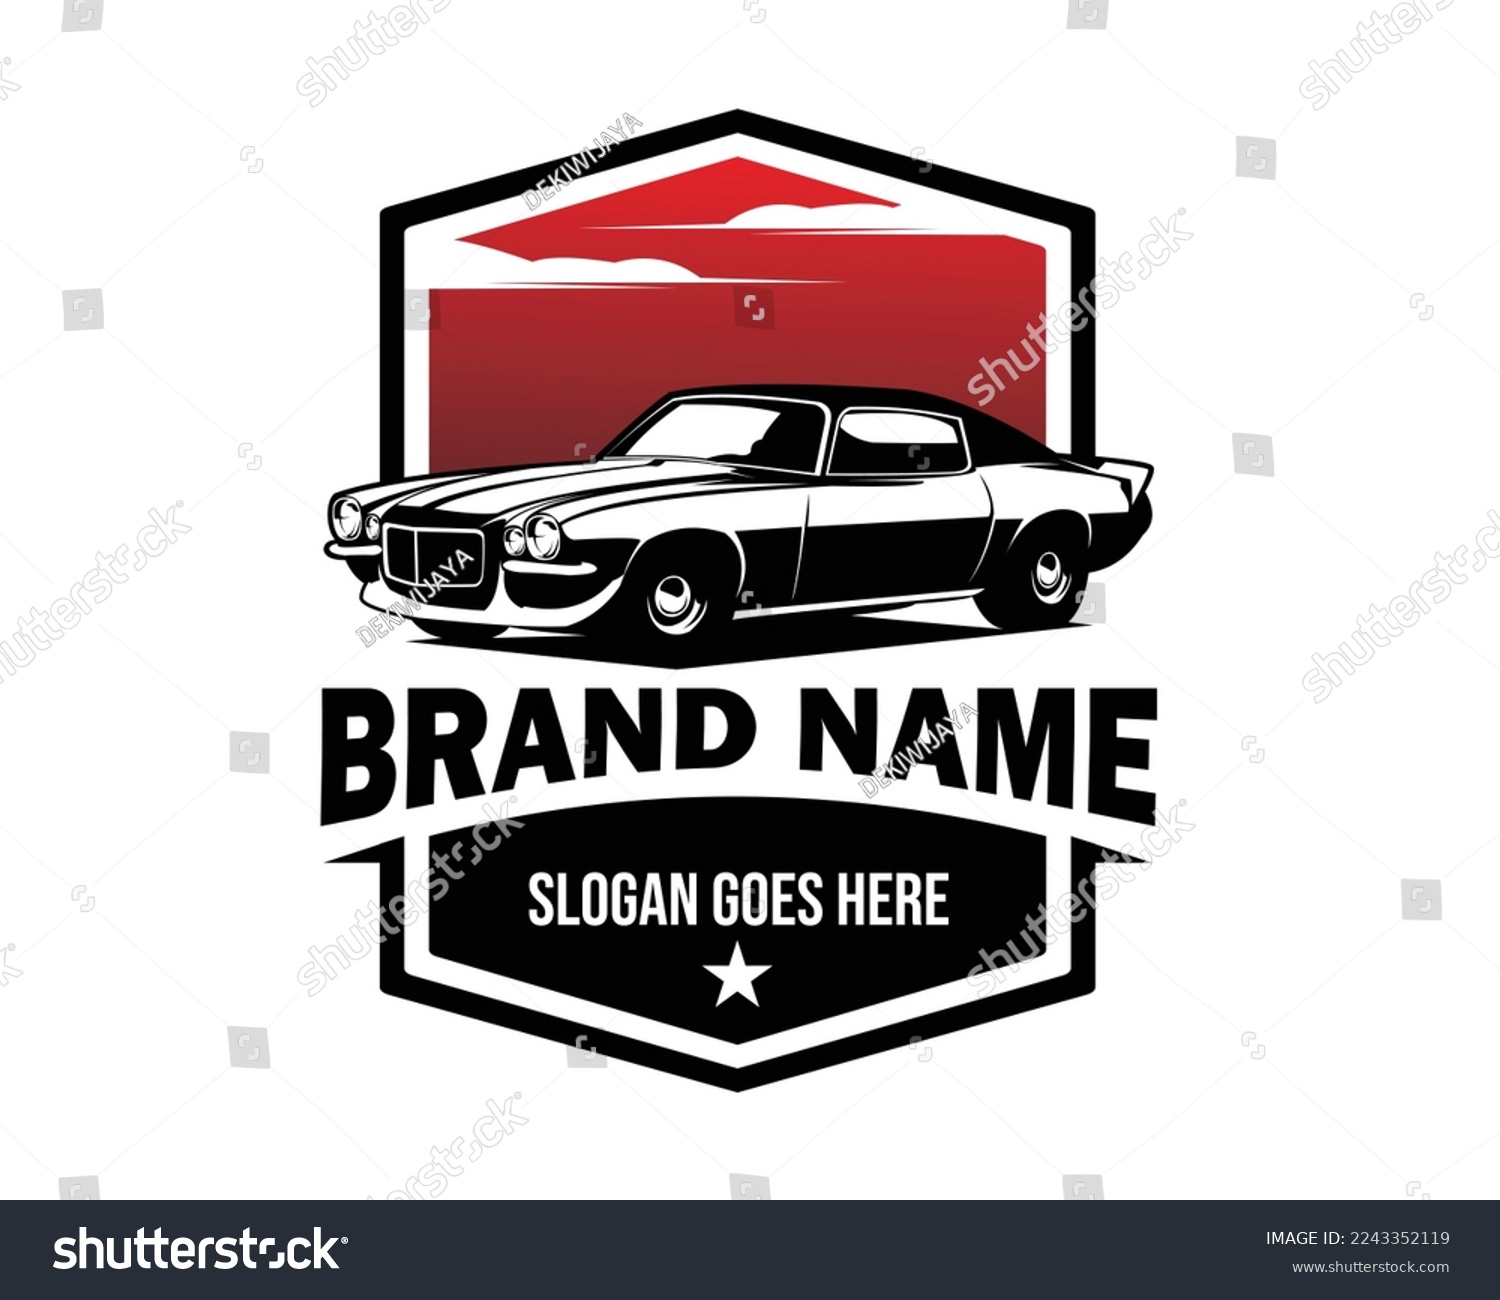 SVG of 1970 old chevy camaro silhouette. isolated white background view from side. Best for badge, emblem, logo, icon, sticker design, car industry. available in eps 10. svg